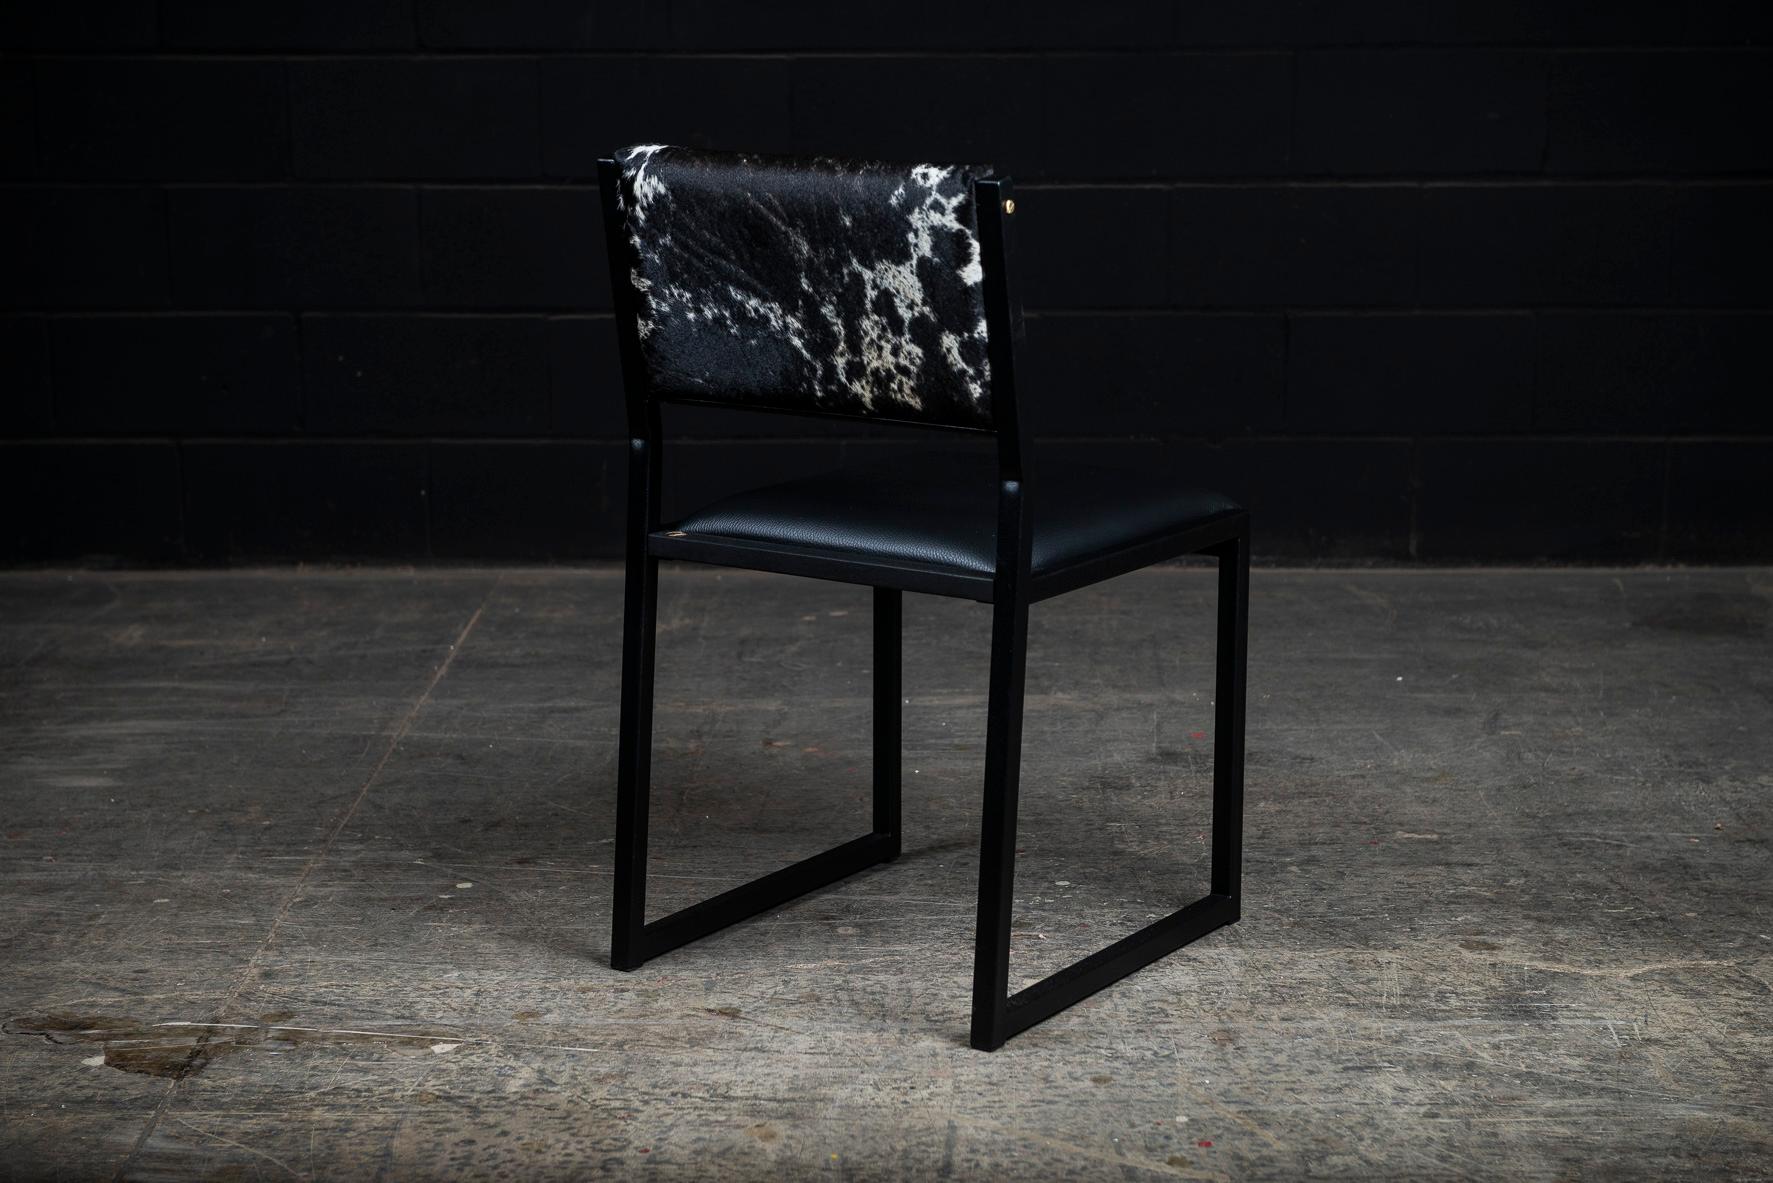 Canadian 8x Shaker Modern Chair, by Ambrozia, Salt and Pepper Cow Hide and Black Leather For Sale